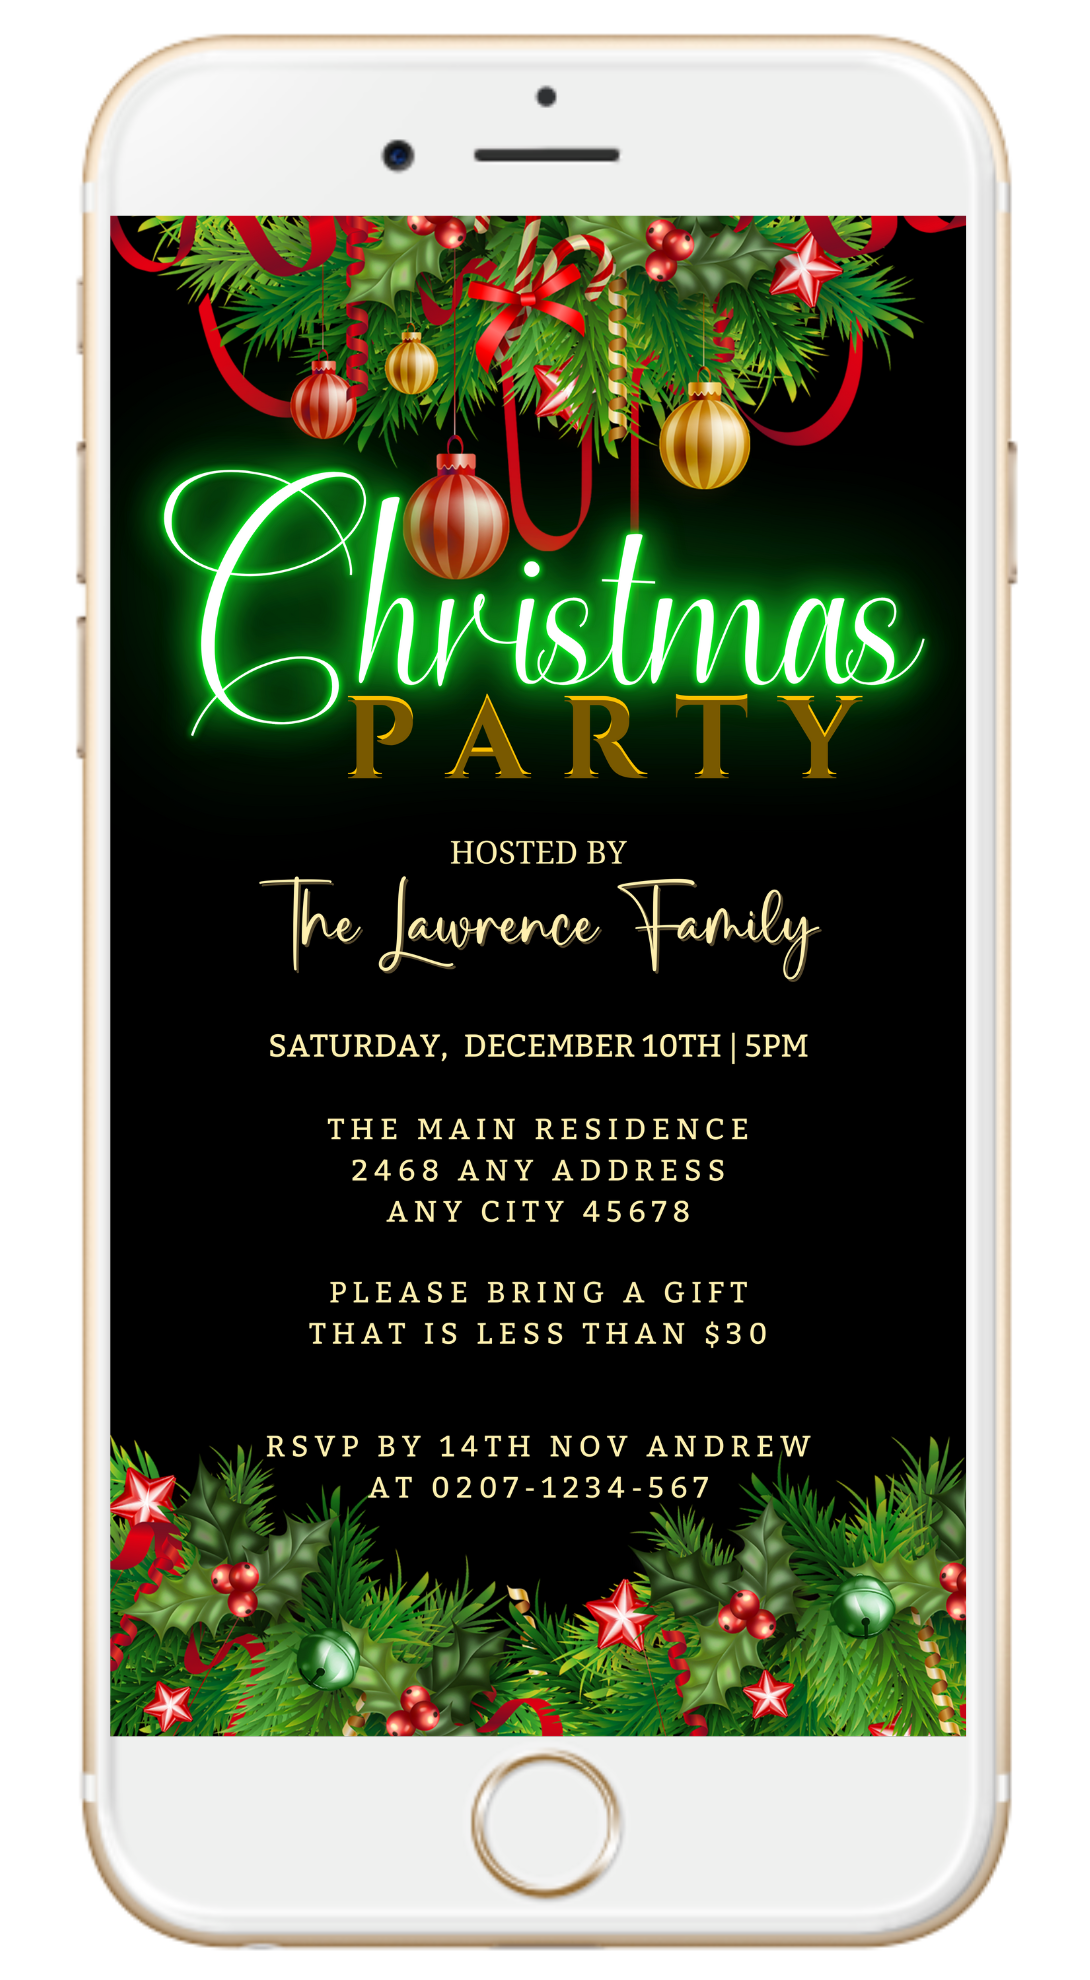 Phone screen displaying a Green Neon Ornaments Border Christmas Party Evite, featuring customizable text for event details.